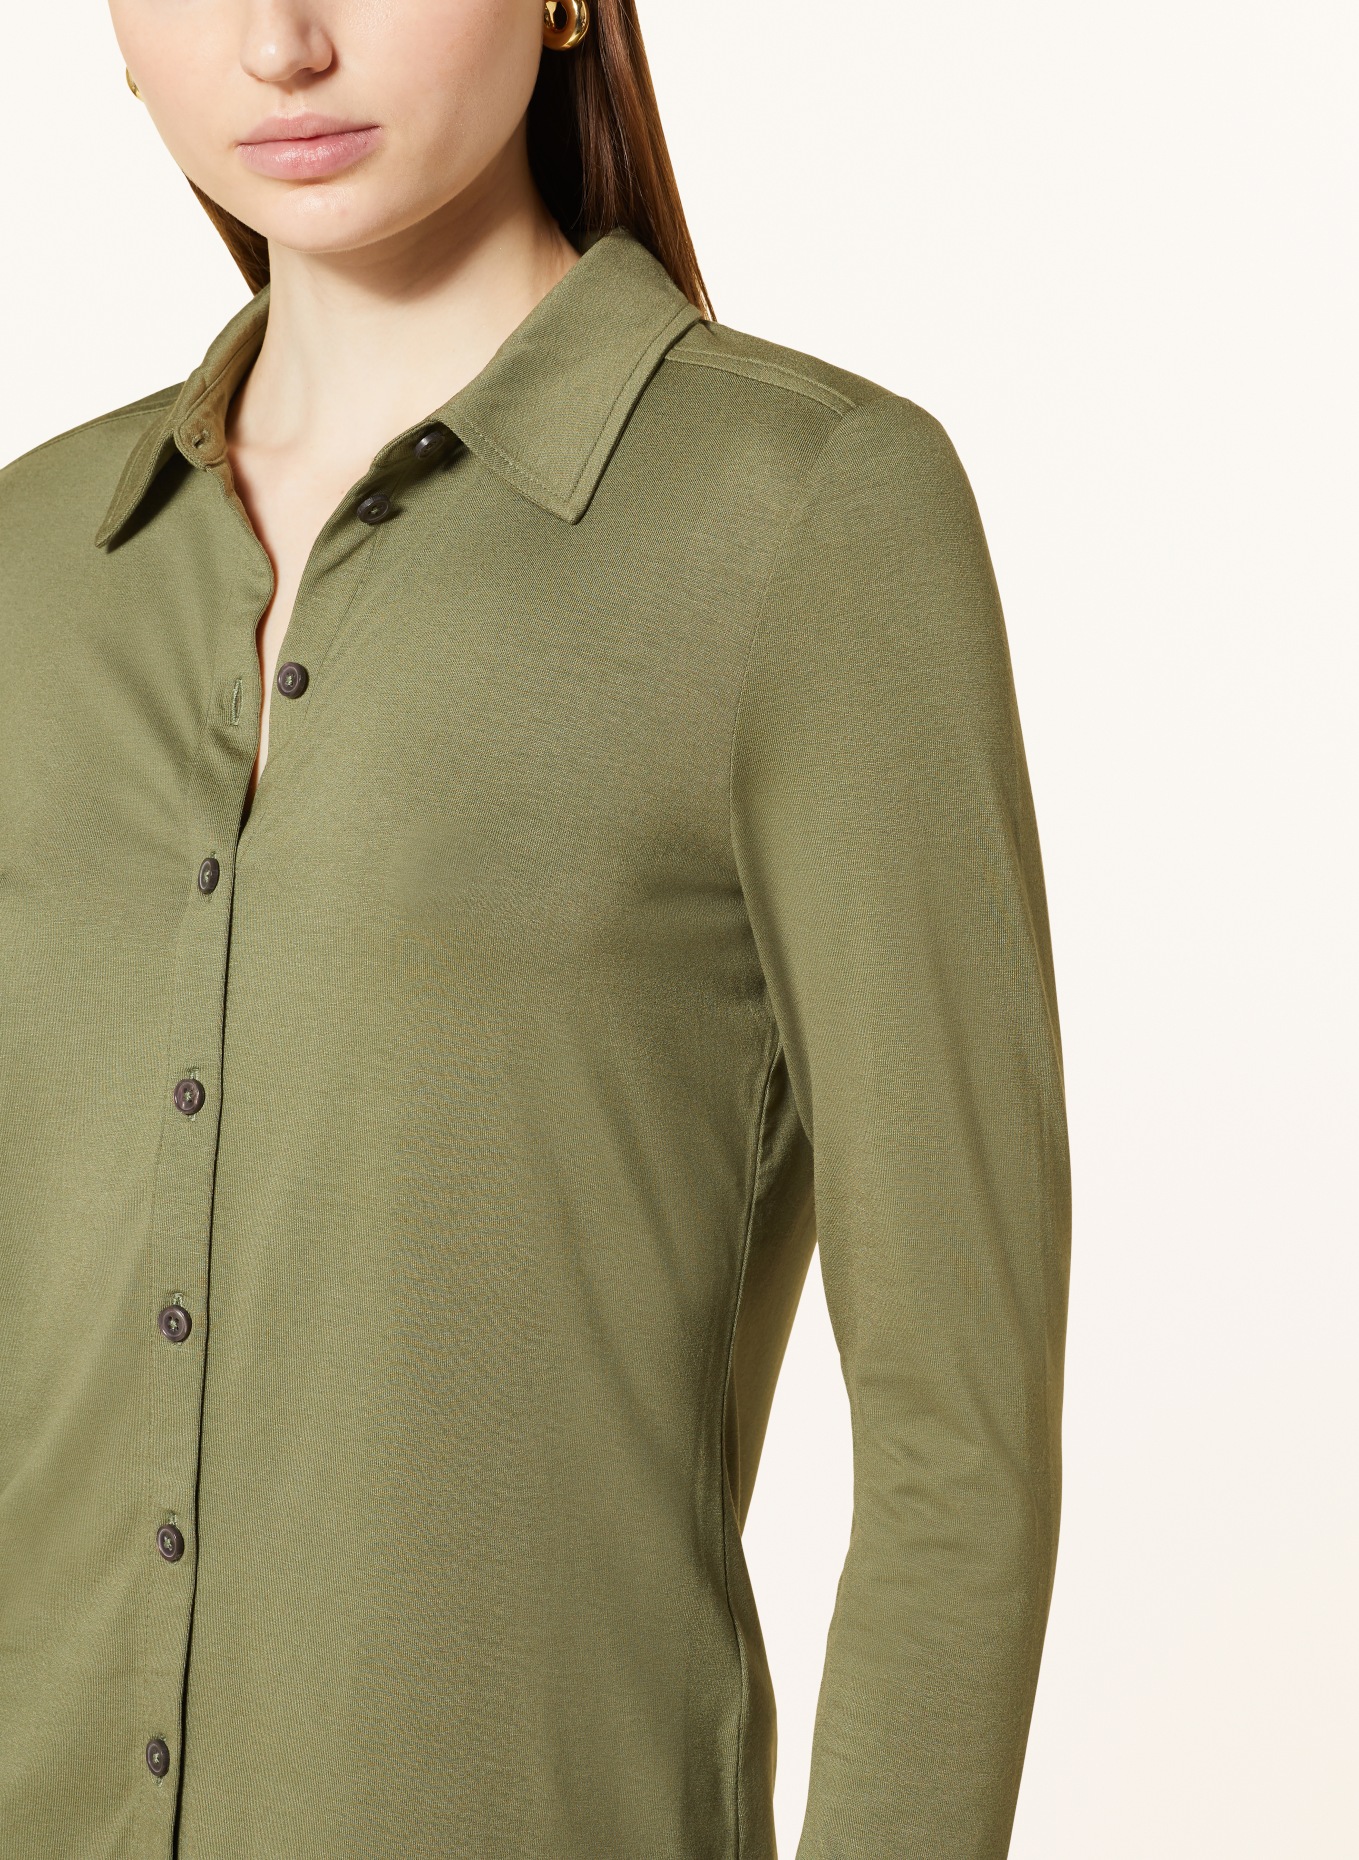 Marc O'Polo Shirt blouse made of jersey, Color: OLIVE (Image 4)